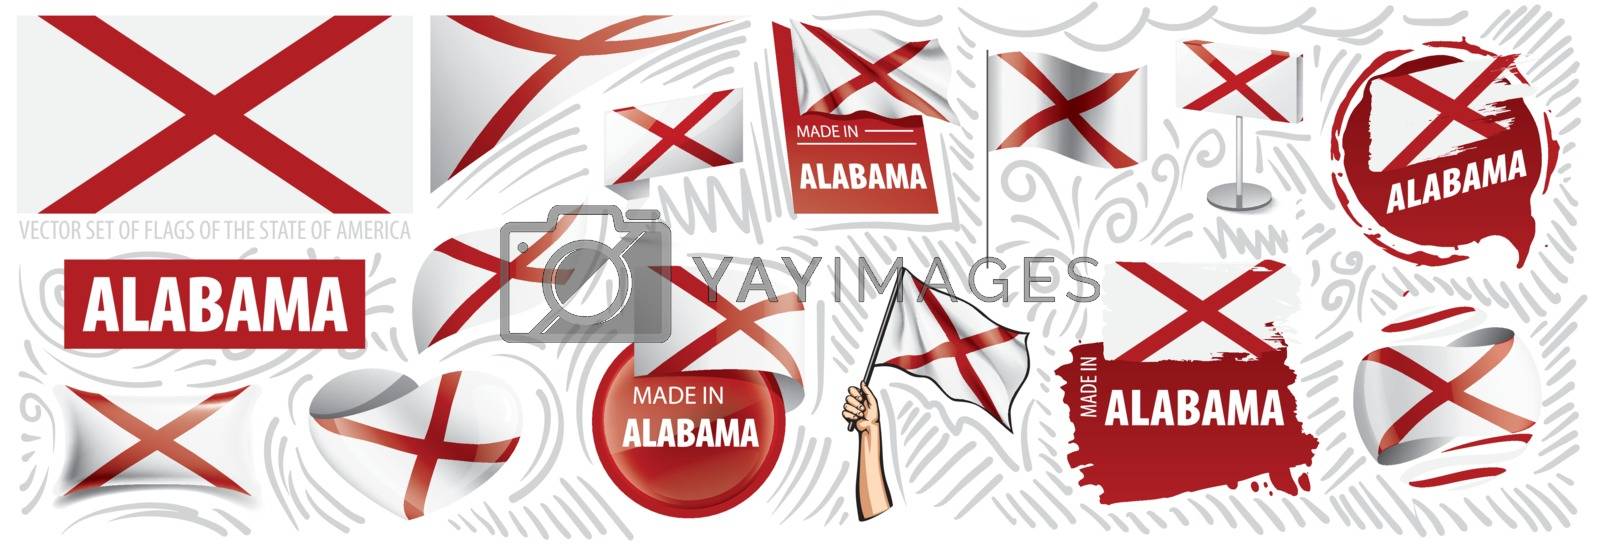 Royalty free image of Vector set of flags of the American state of Alabama in different designs by butenkow